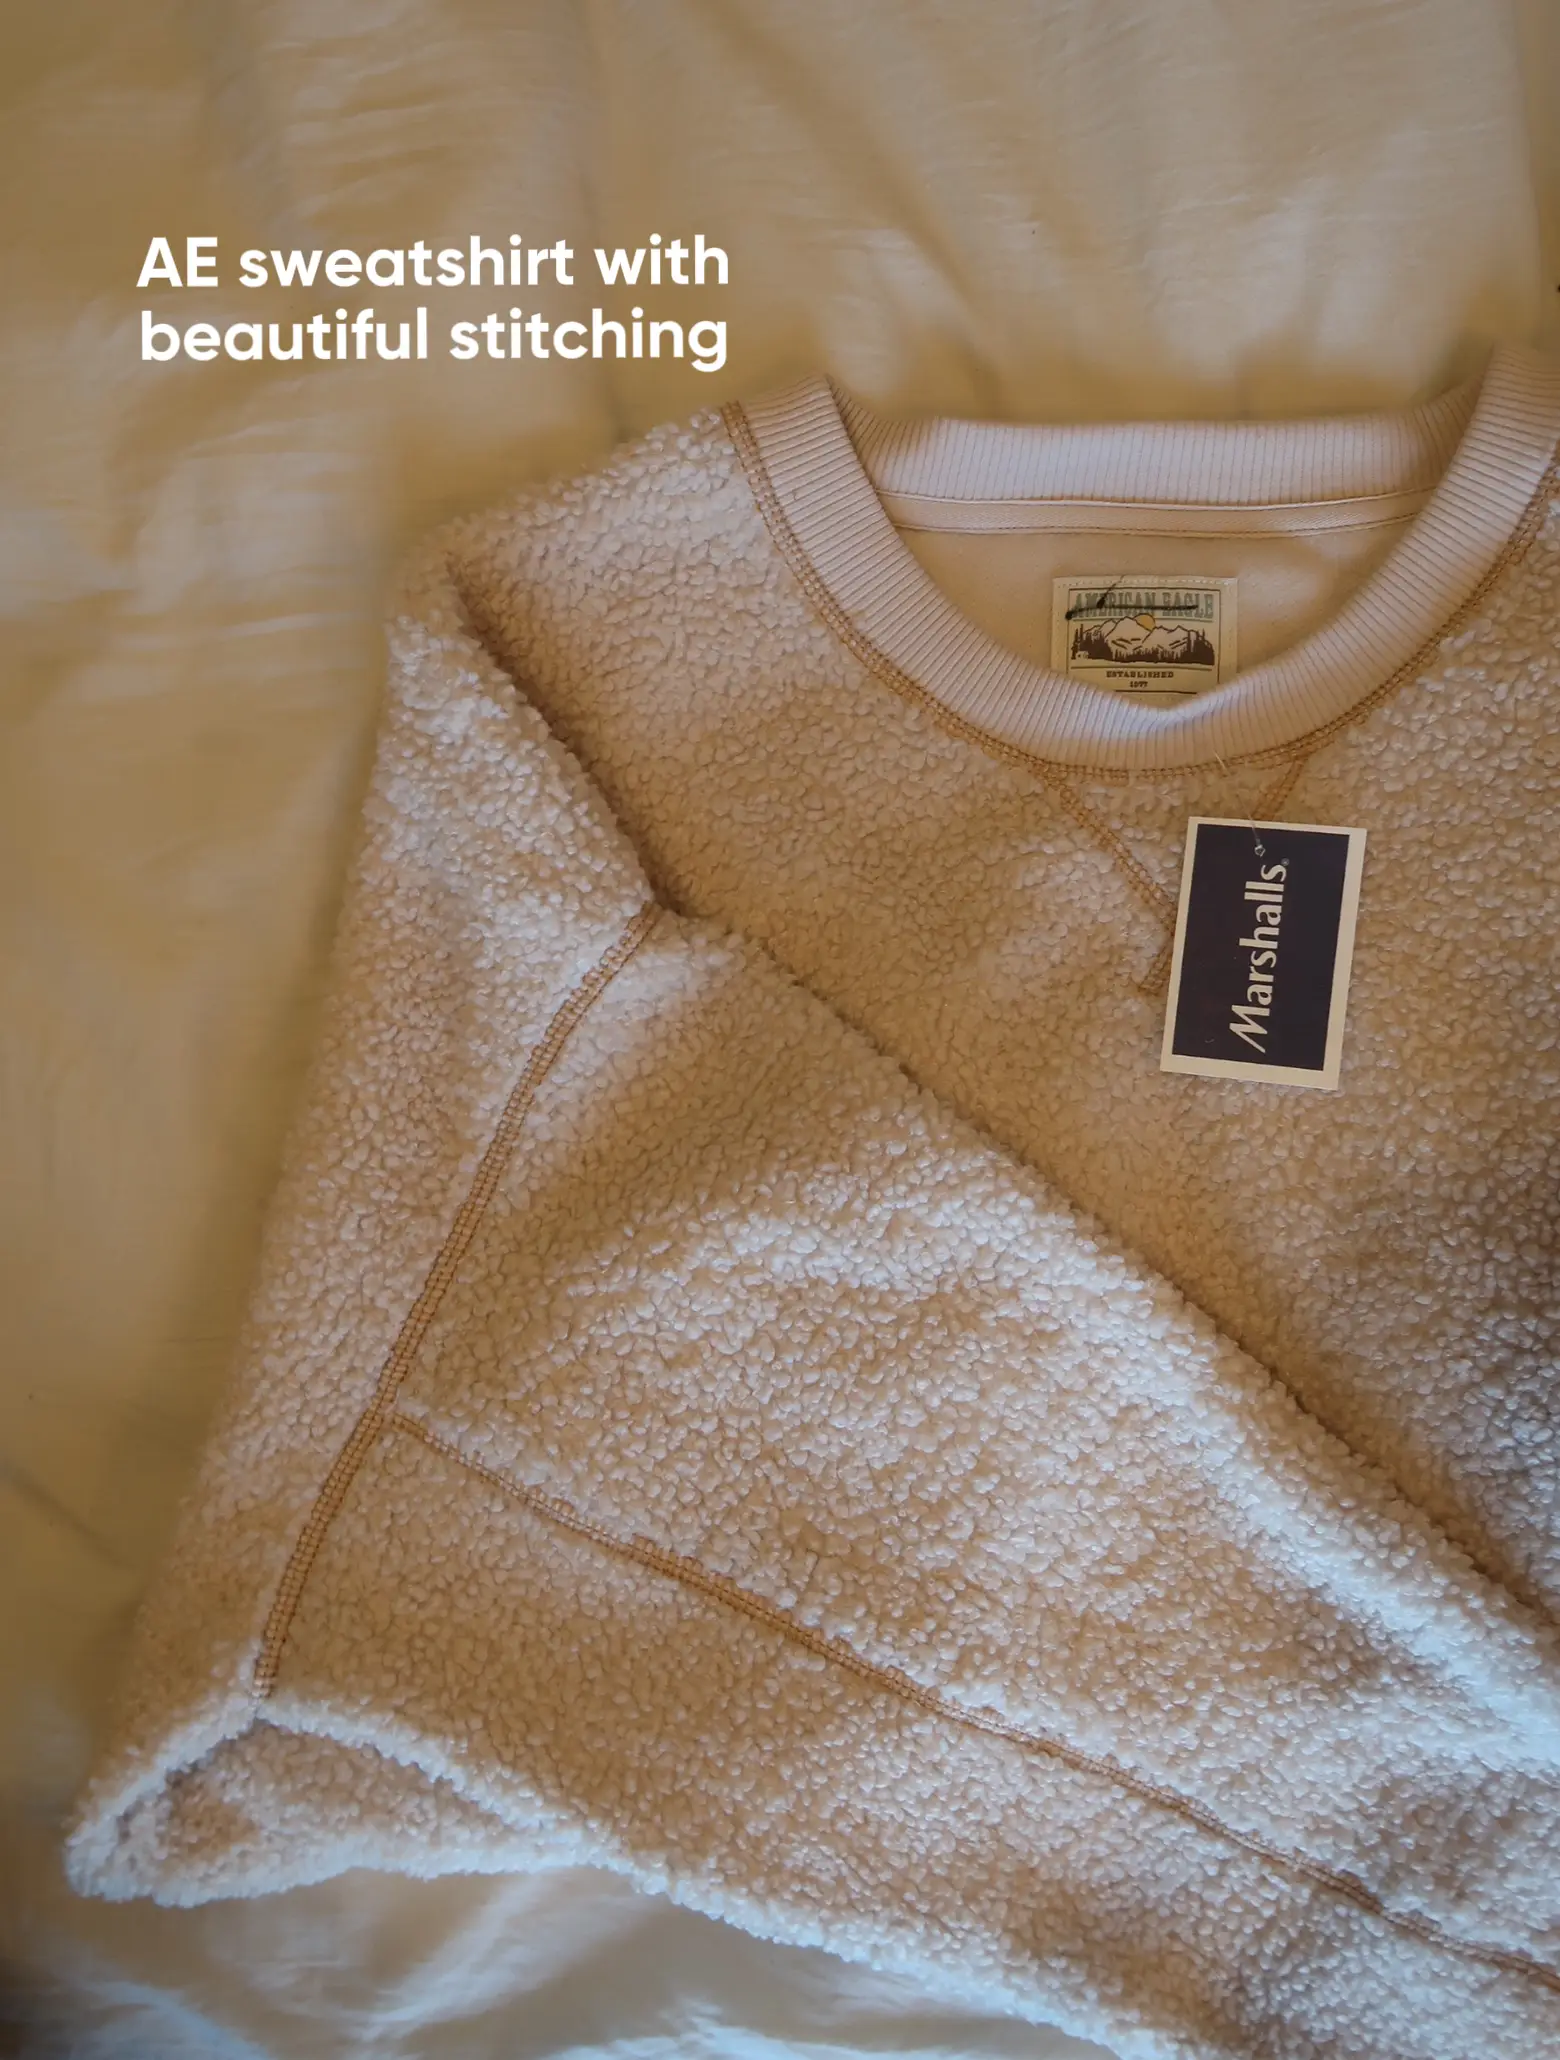 20 top beautiful stitching sweatshirt from American Eagle ideas in